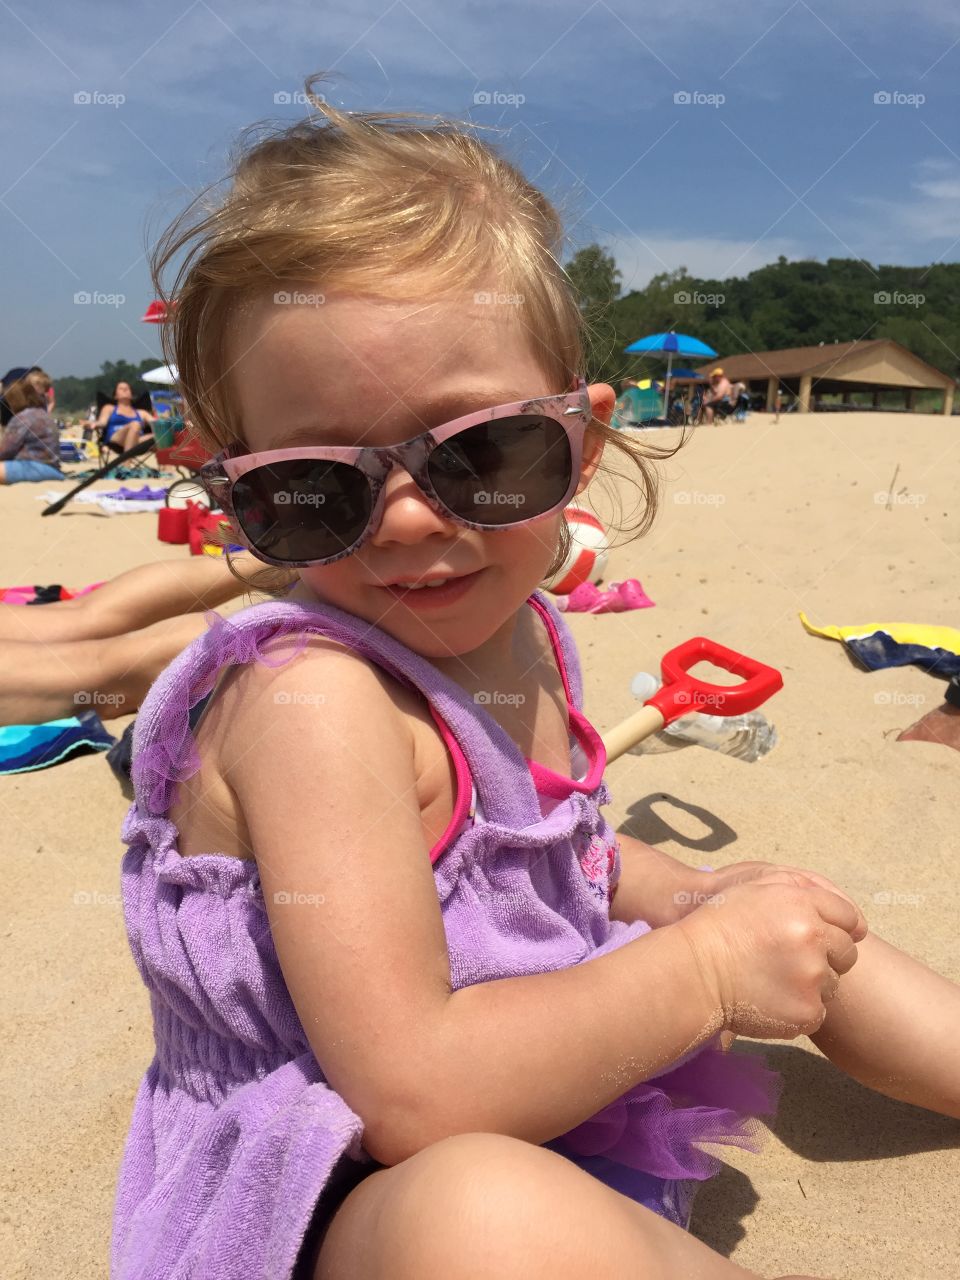 Baby girl . My 2 year old niece at the beach 